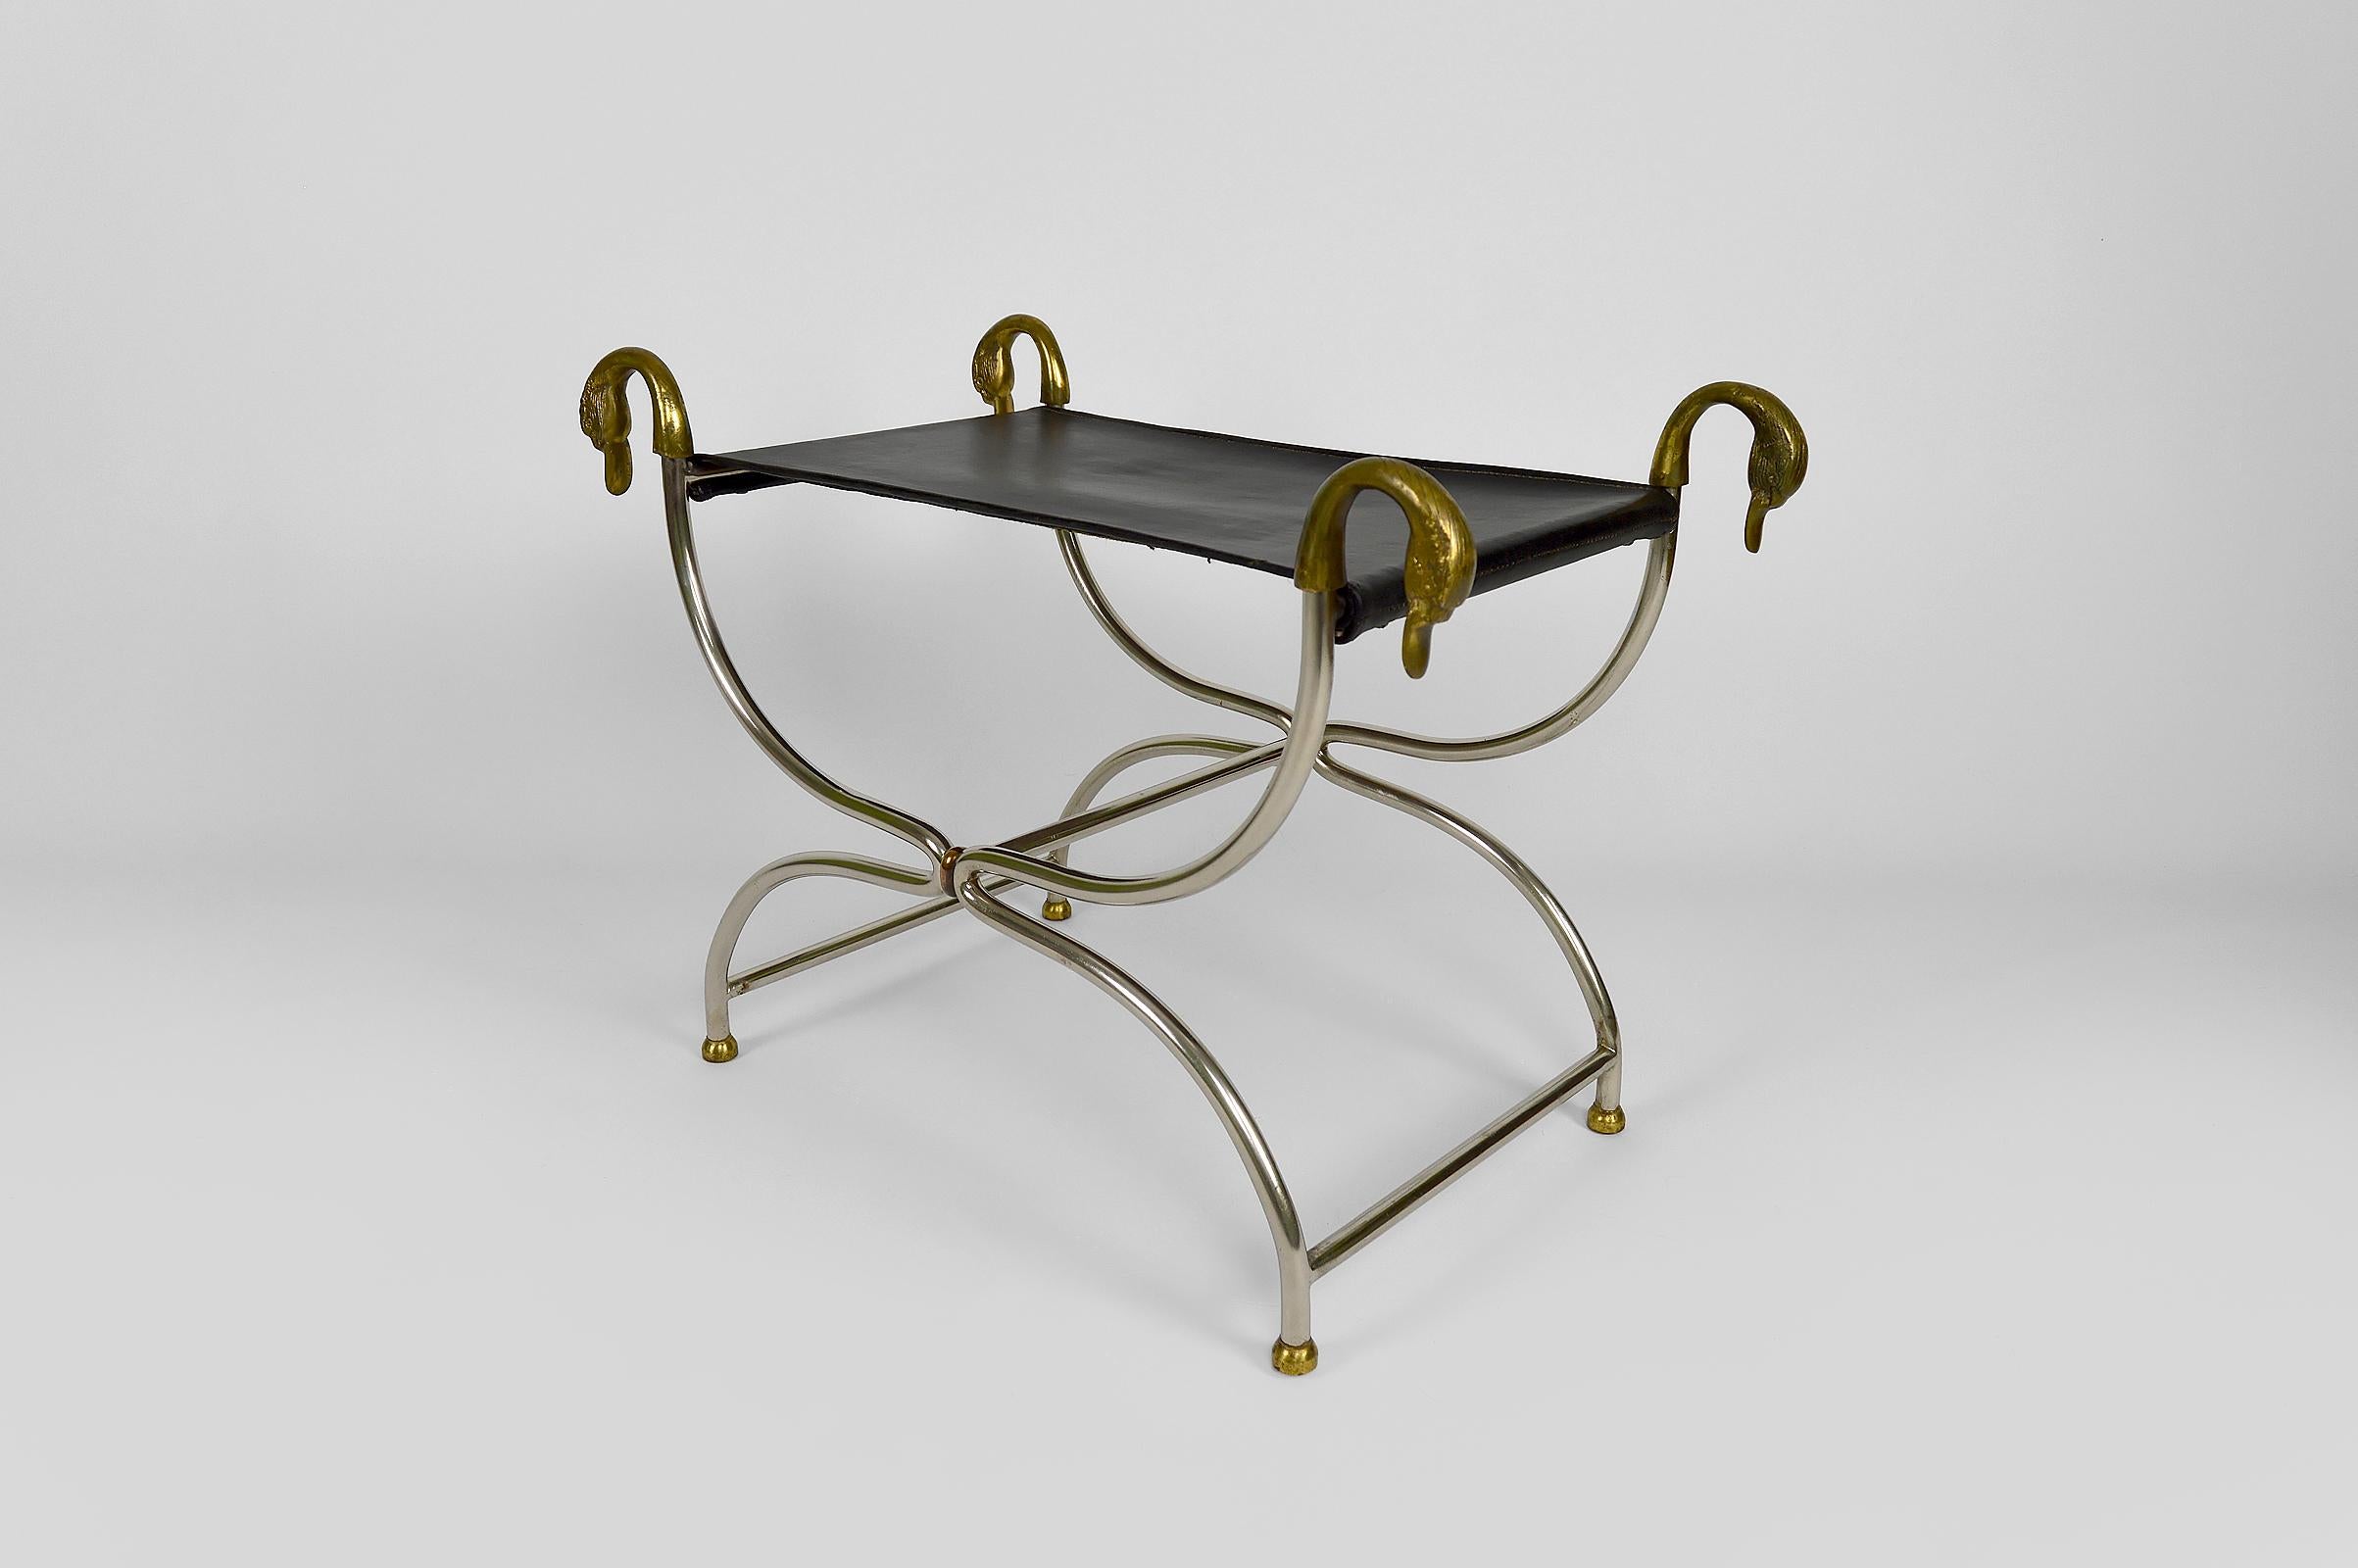 Elegant antique-style stool / curule with chromed metal structure ending in bronze or brass swan heads, and black leather seat.

Neo / Revival Classical style / Hollywood Regency, France, circa 1960-1970.
In the style of Maison Jansen